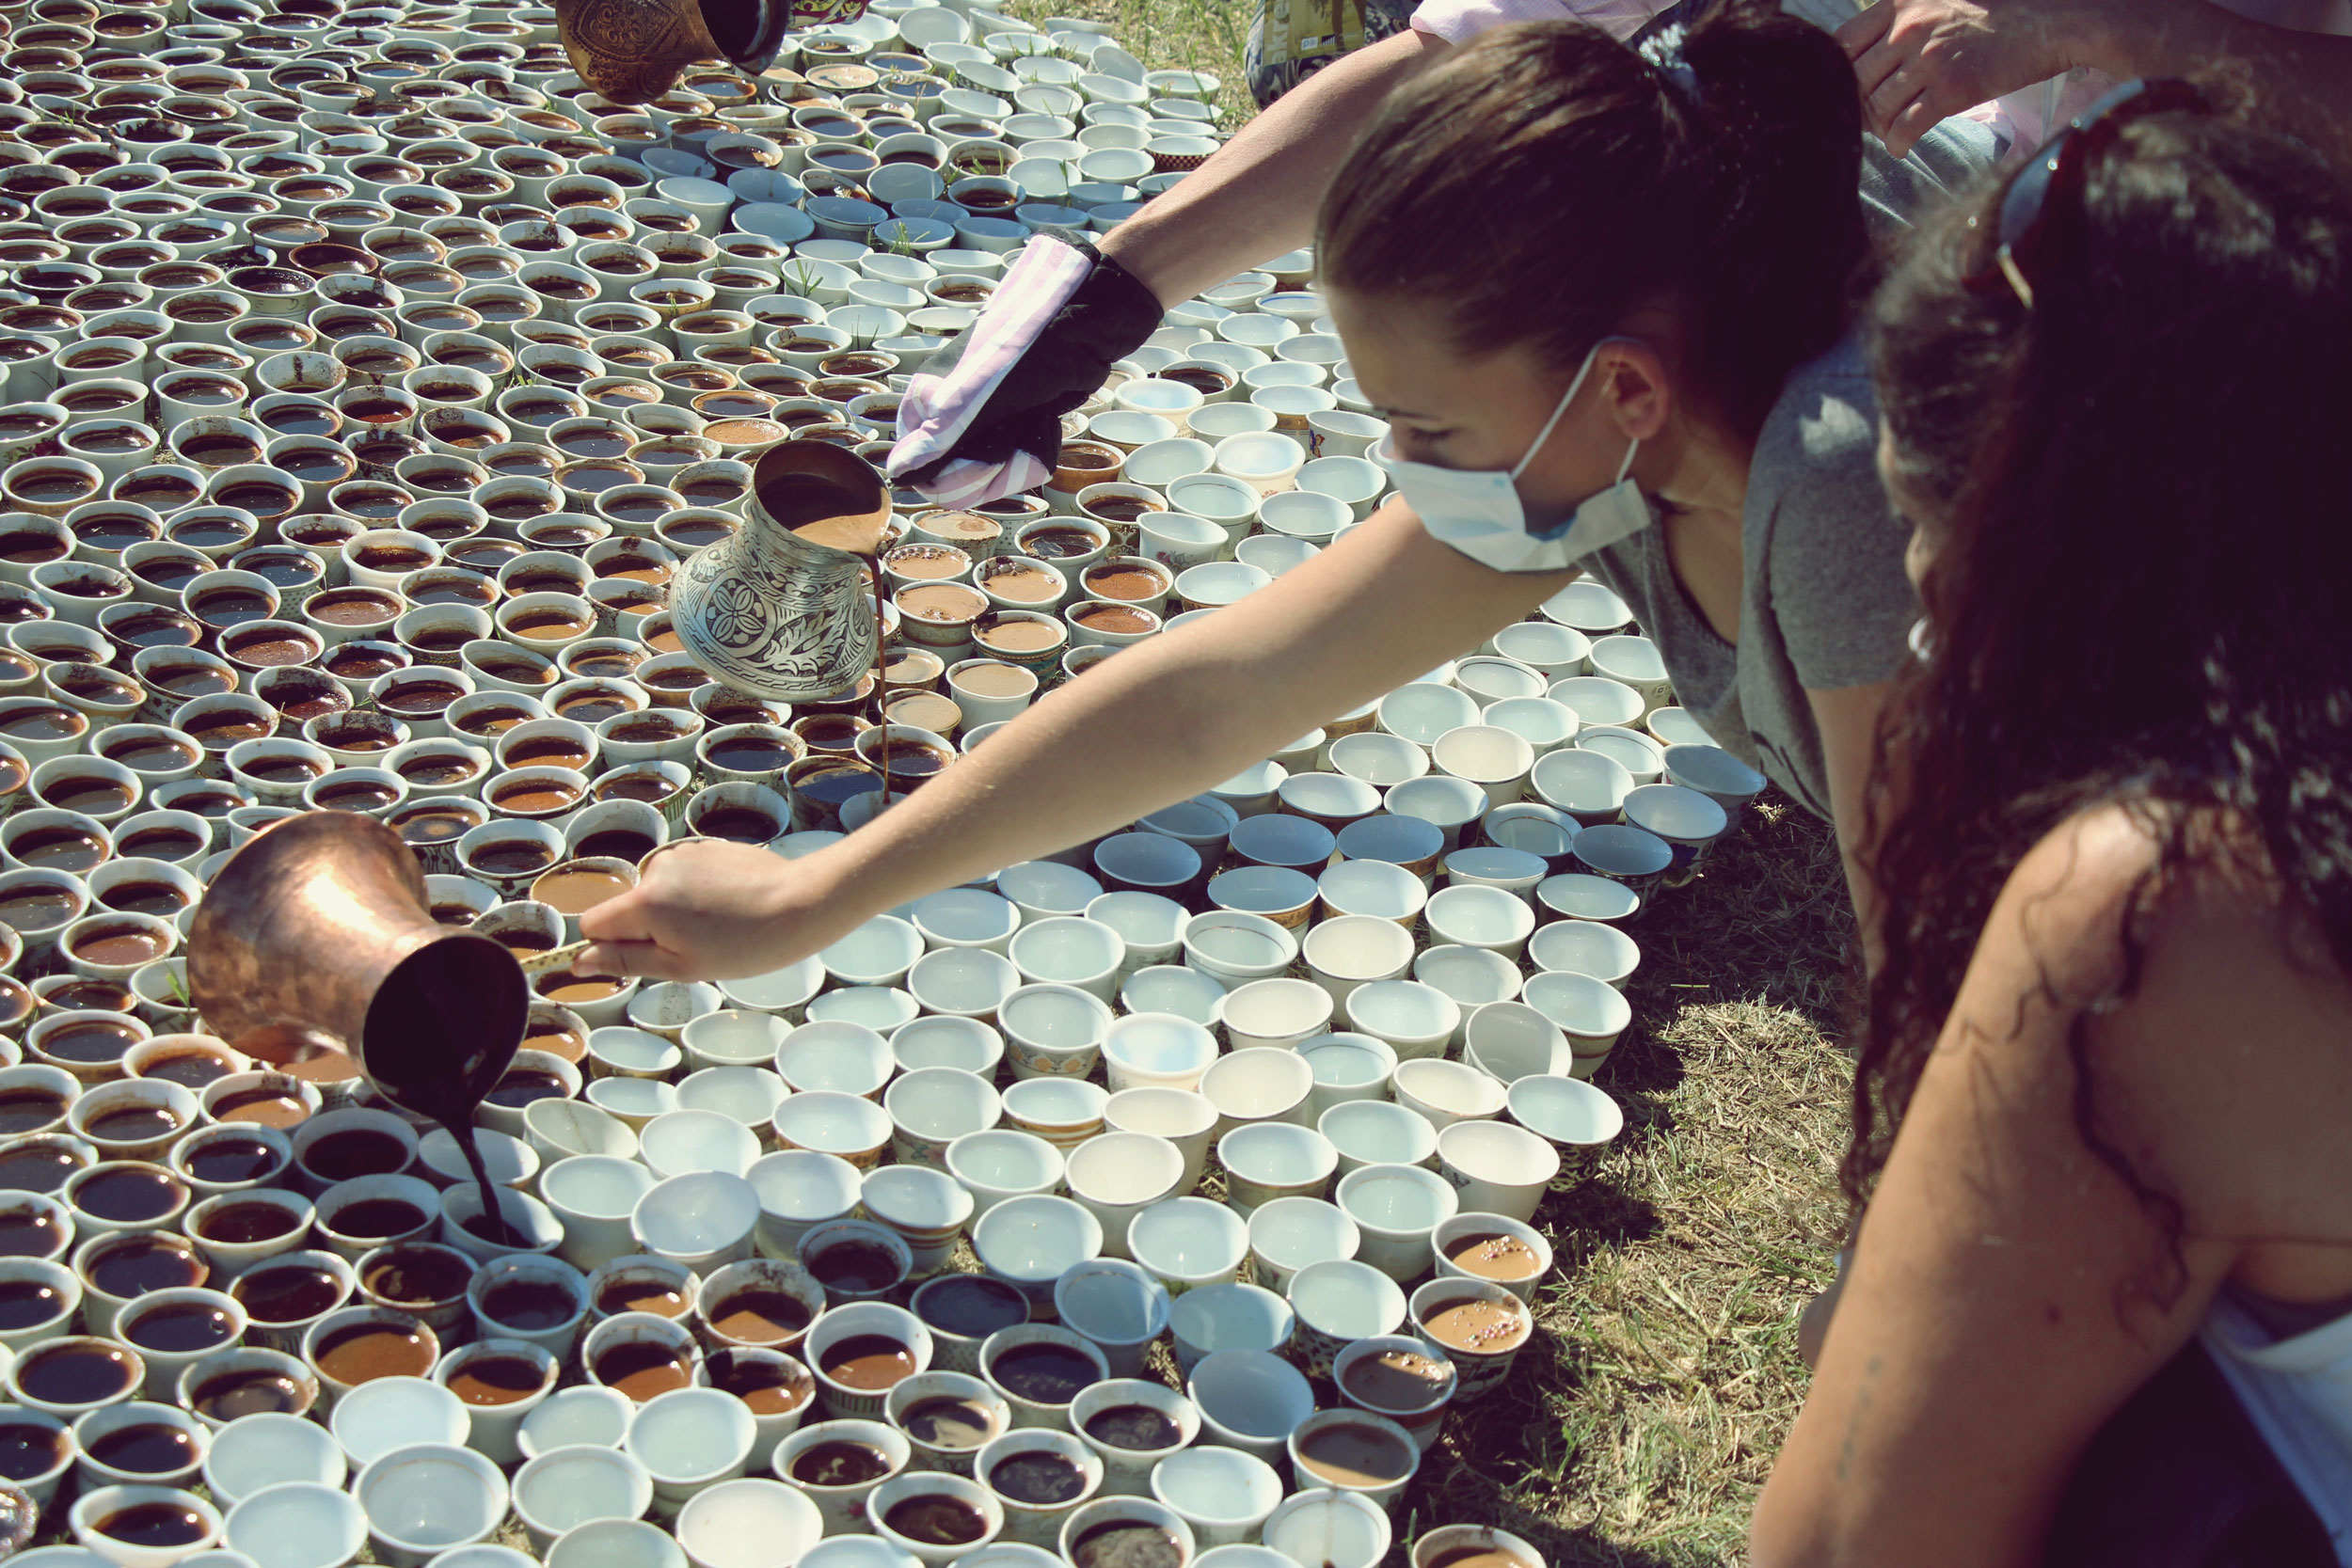 A photograph of people pouring liquid into cups.